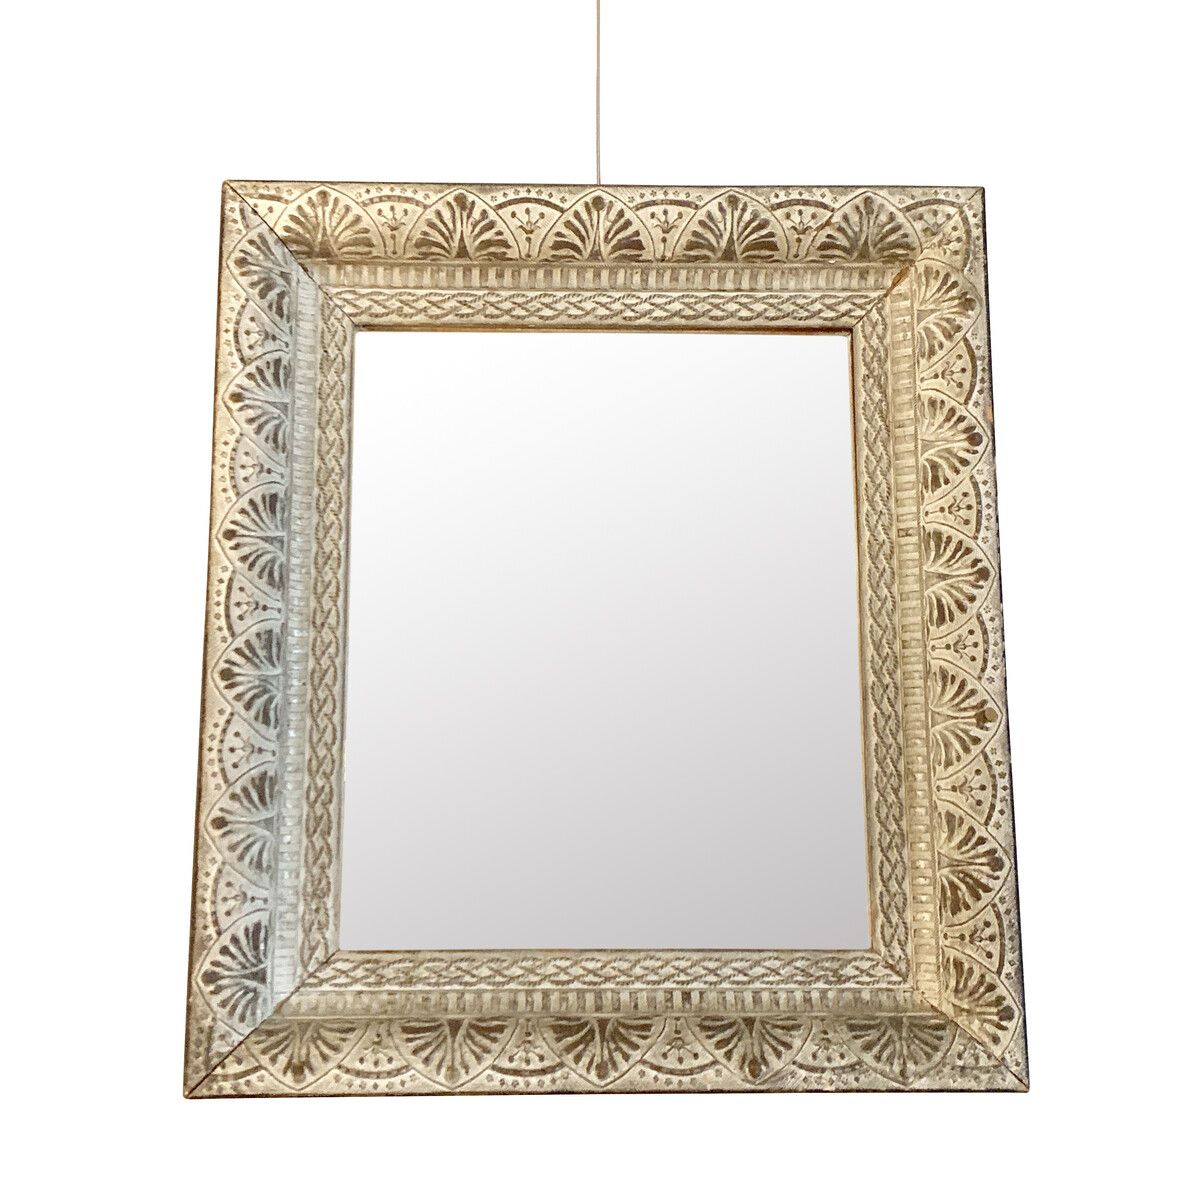 Balsamo Antiques | 1940's French Silver Leaf Framed Mirror Regarding Gold Leaf Floor Mirrors (View 5 of 15)